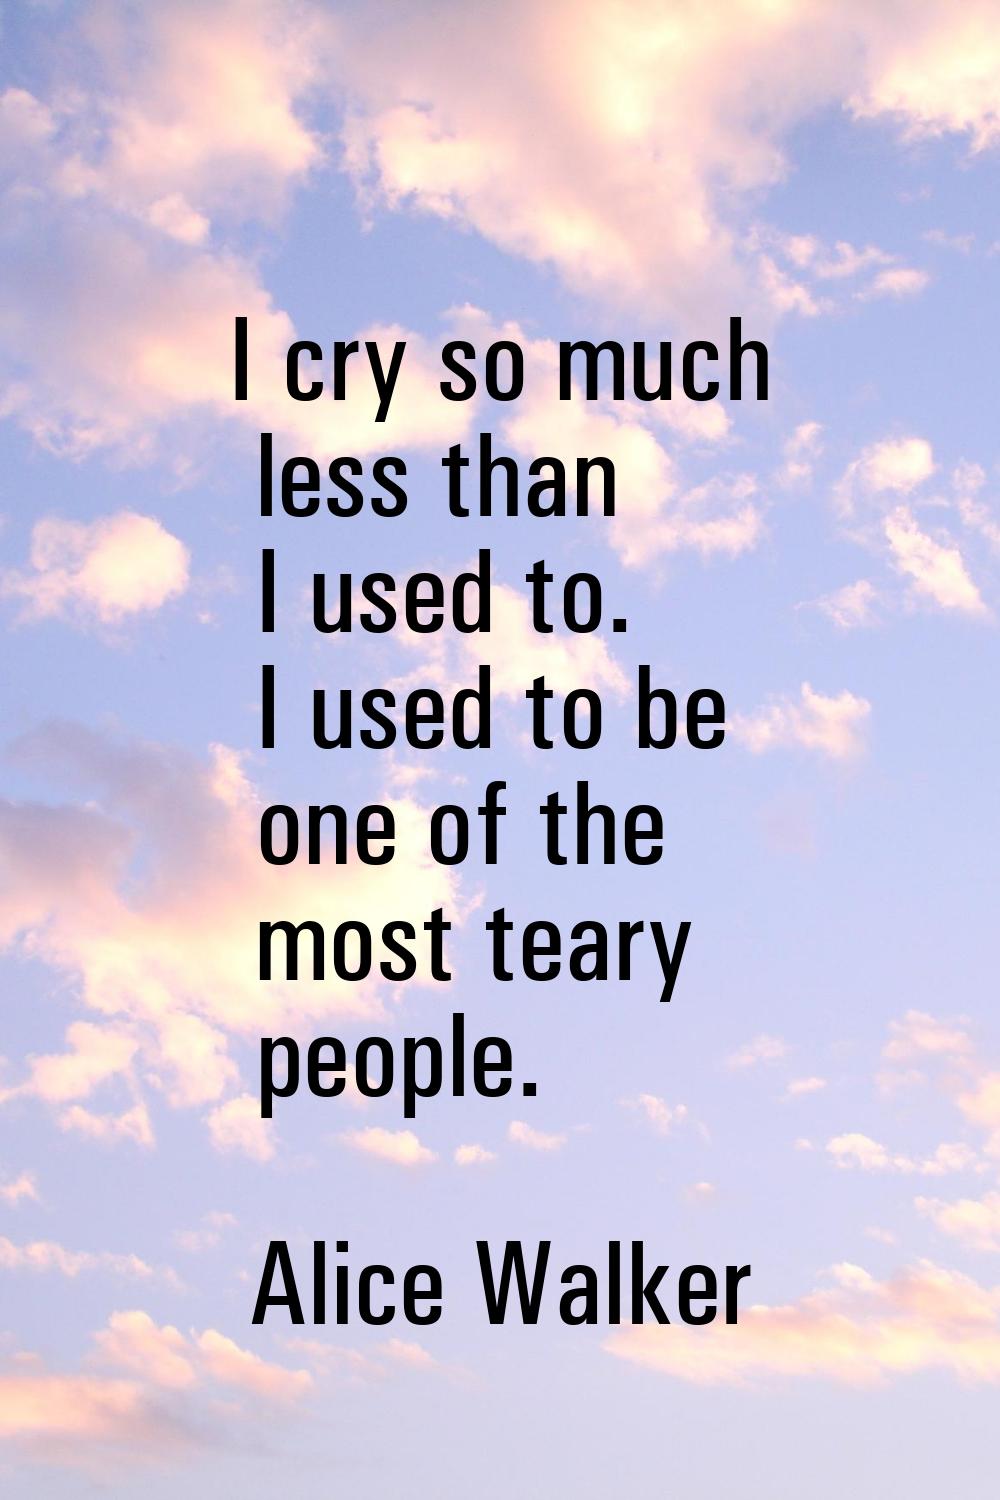 I cry so much less than I used to. I used to be one of the most teary people.